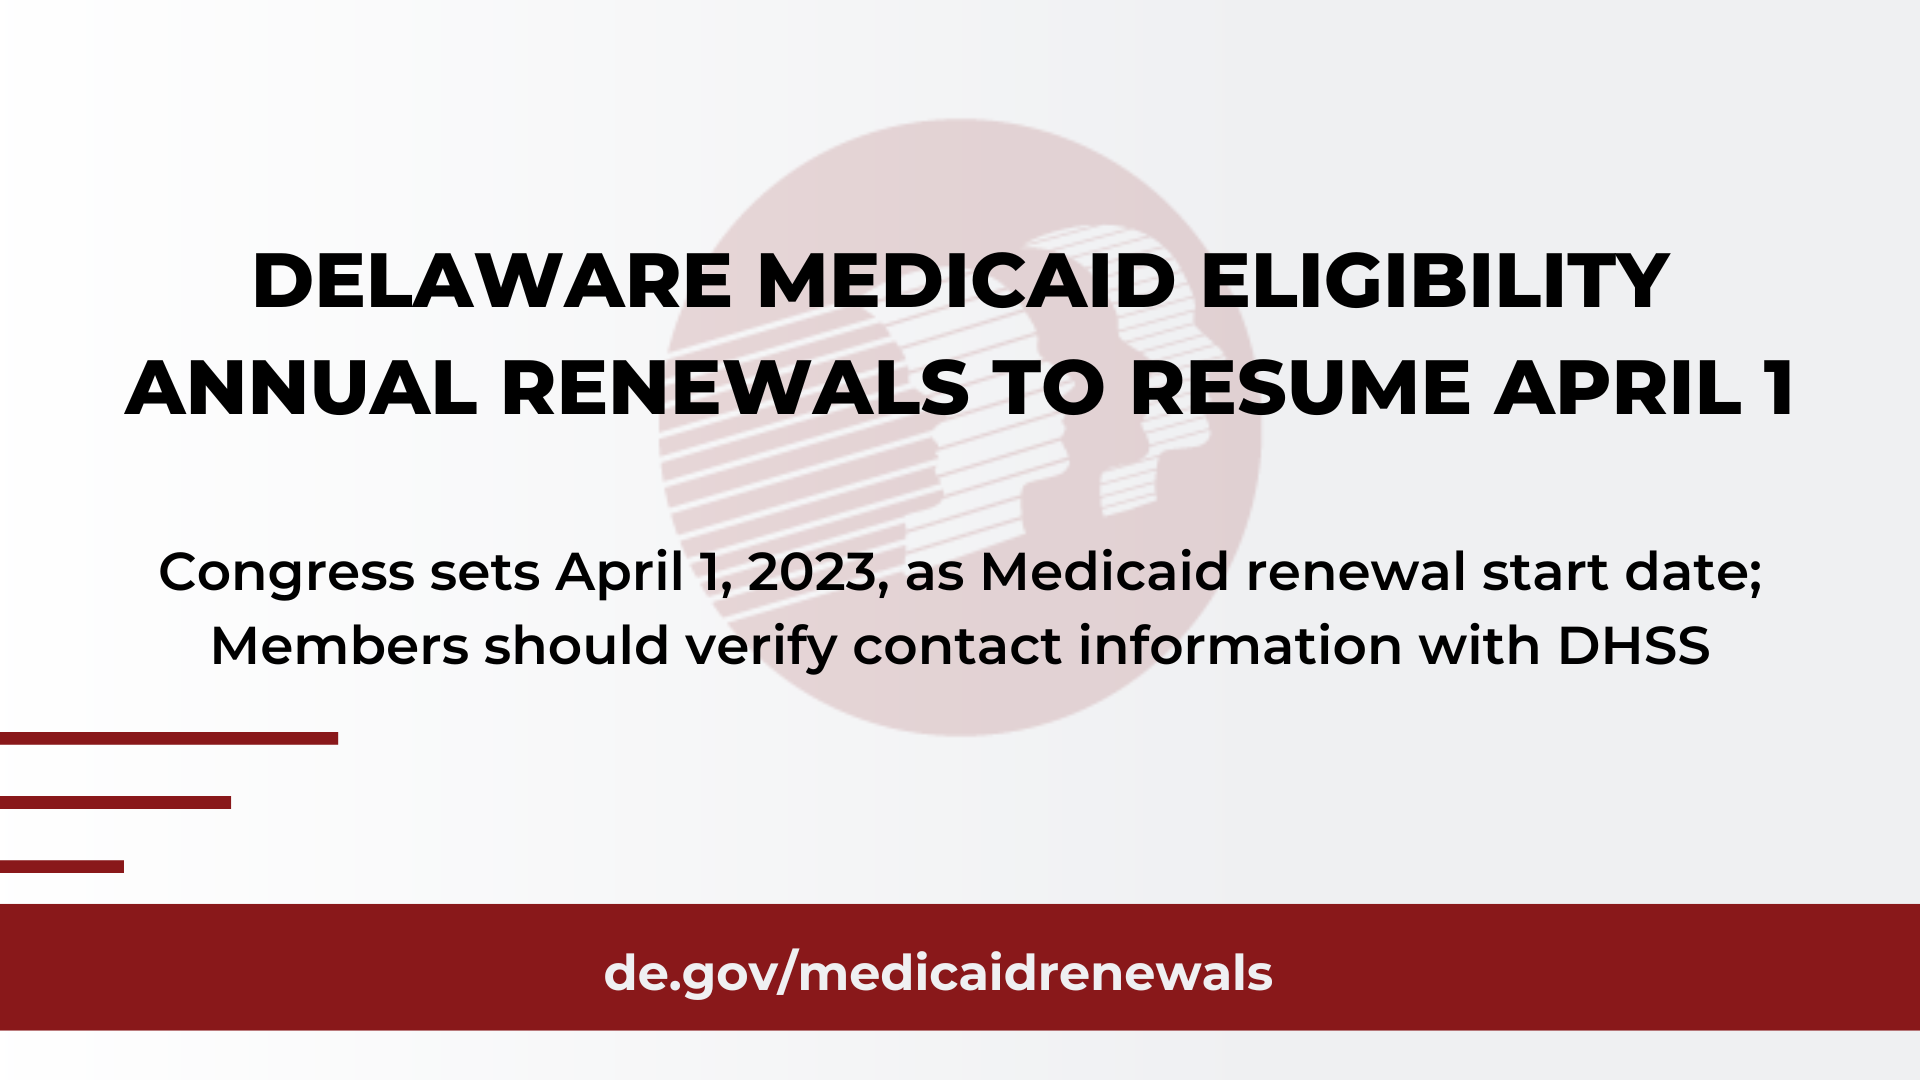 Graphic stating that Delaware Medicaid Eligibility Renewals will restart April 1. Includes link to de.gov/medicaidrenewals